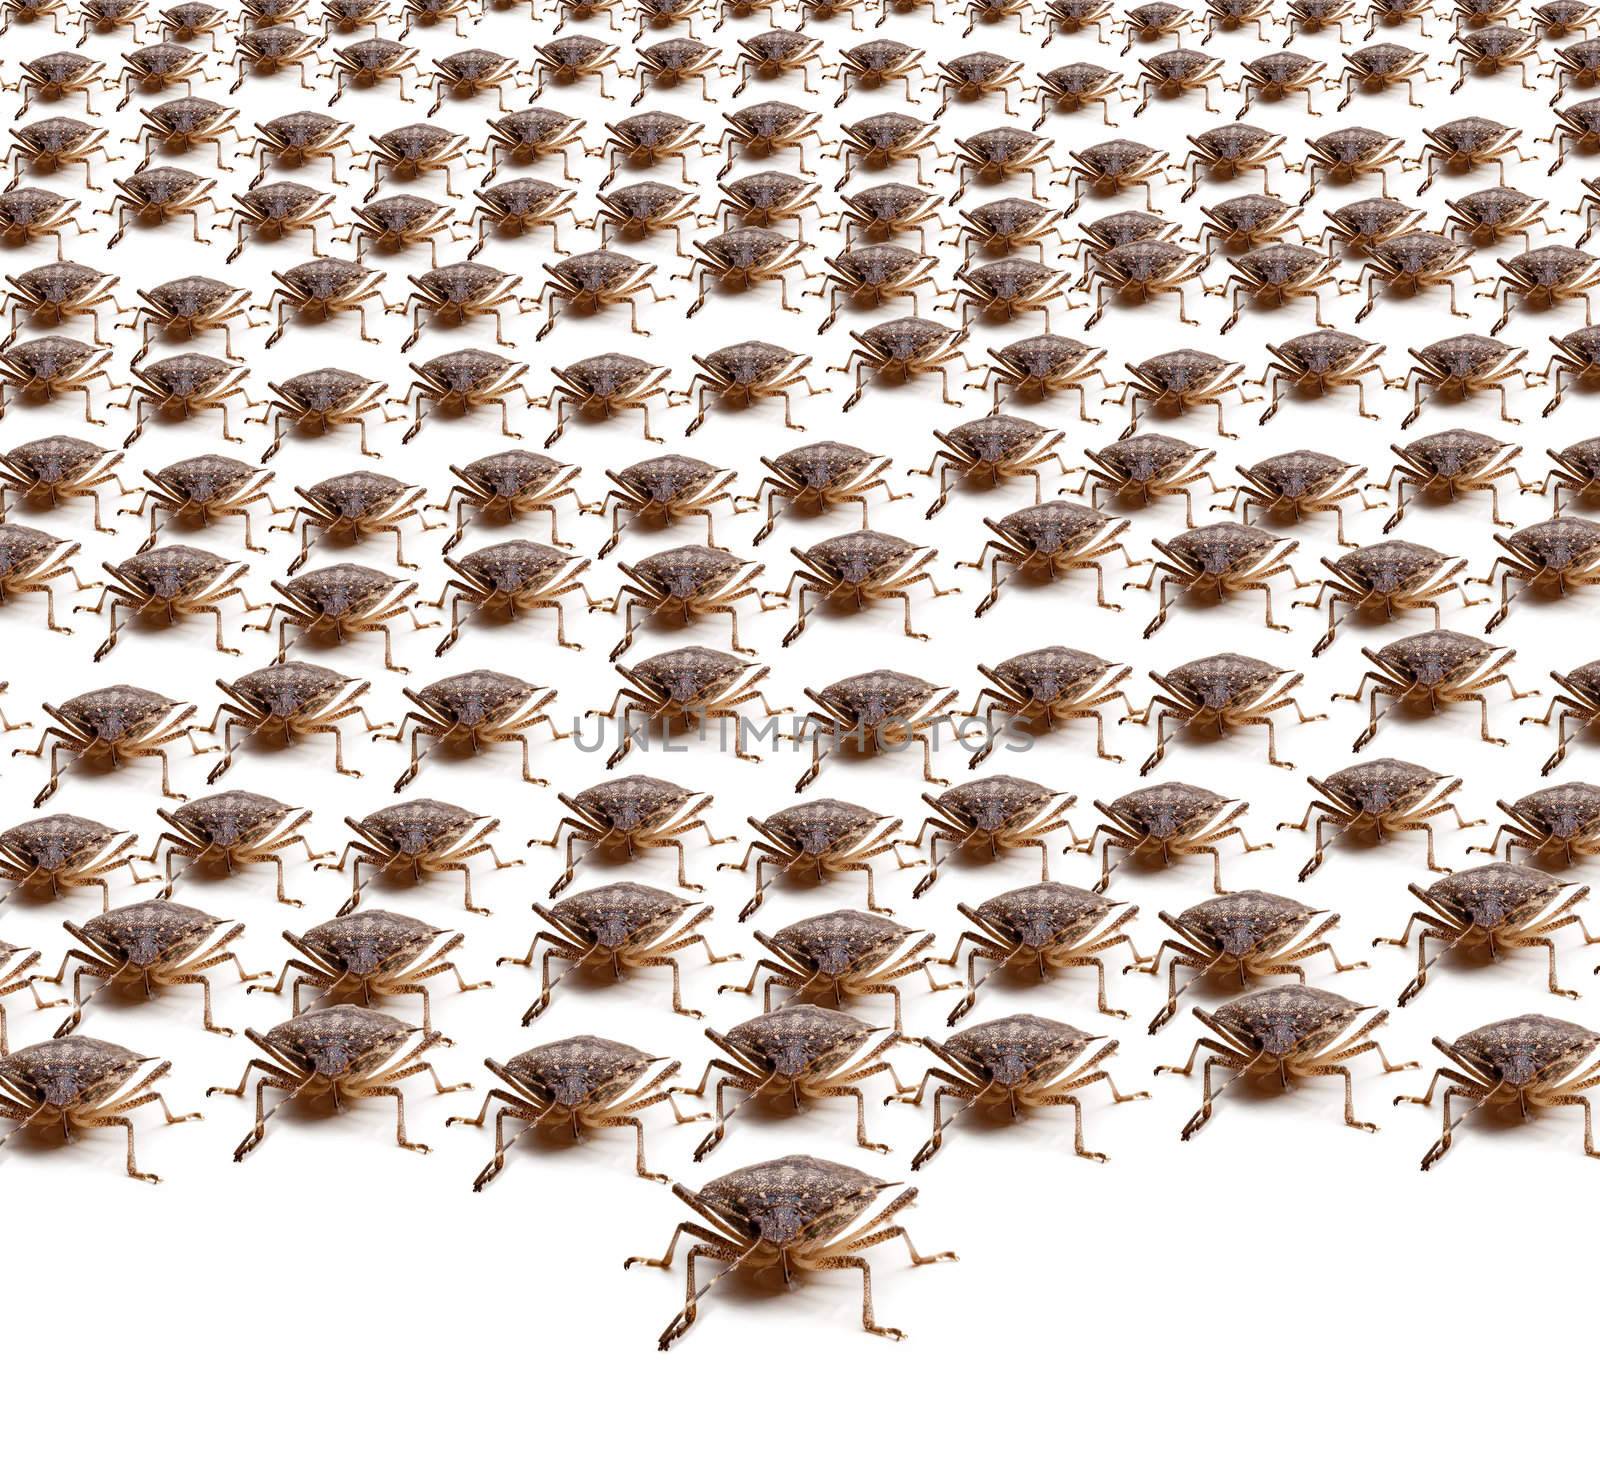 Army of Brown Stink Bugs by steheap